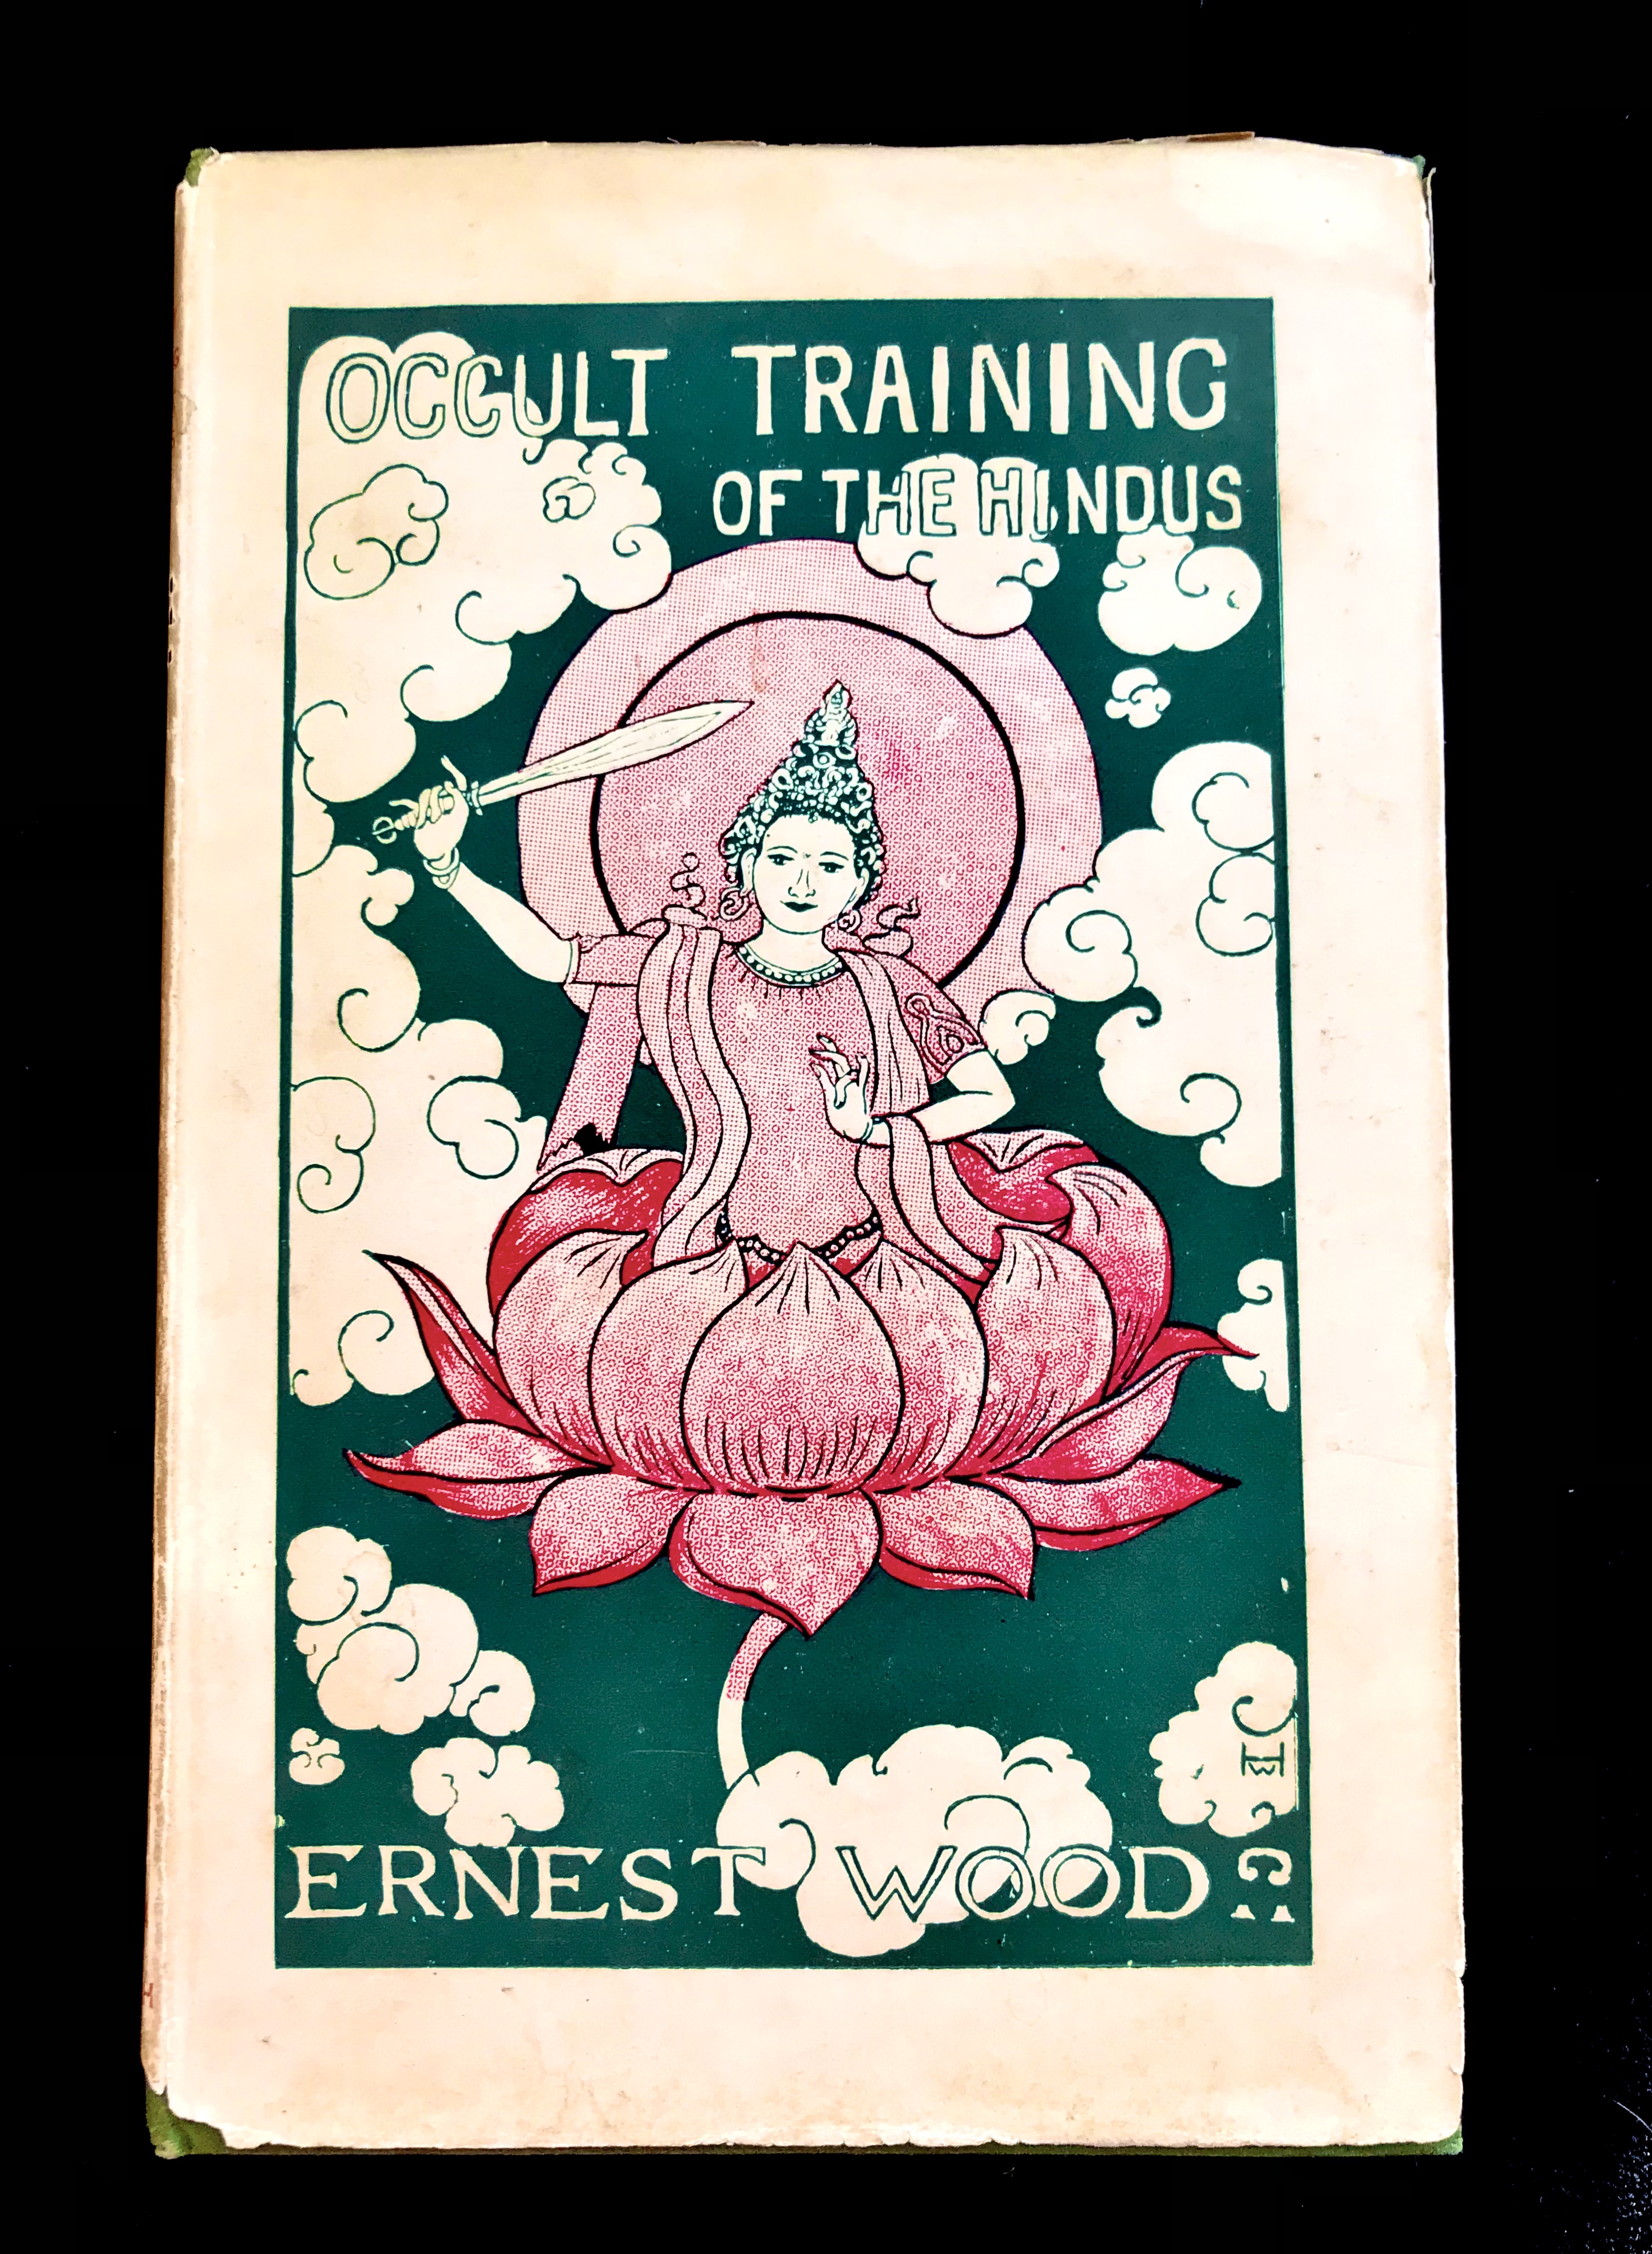 Occult Training Of The Hindus by Ernest Wood